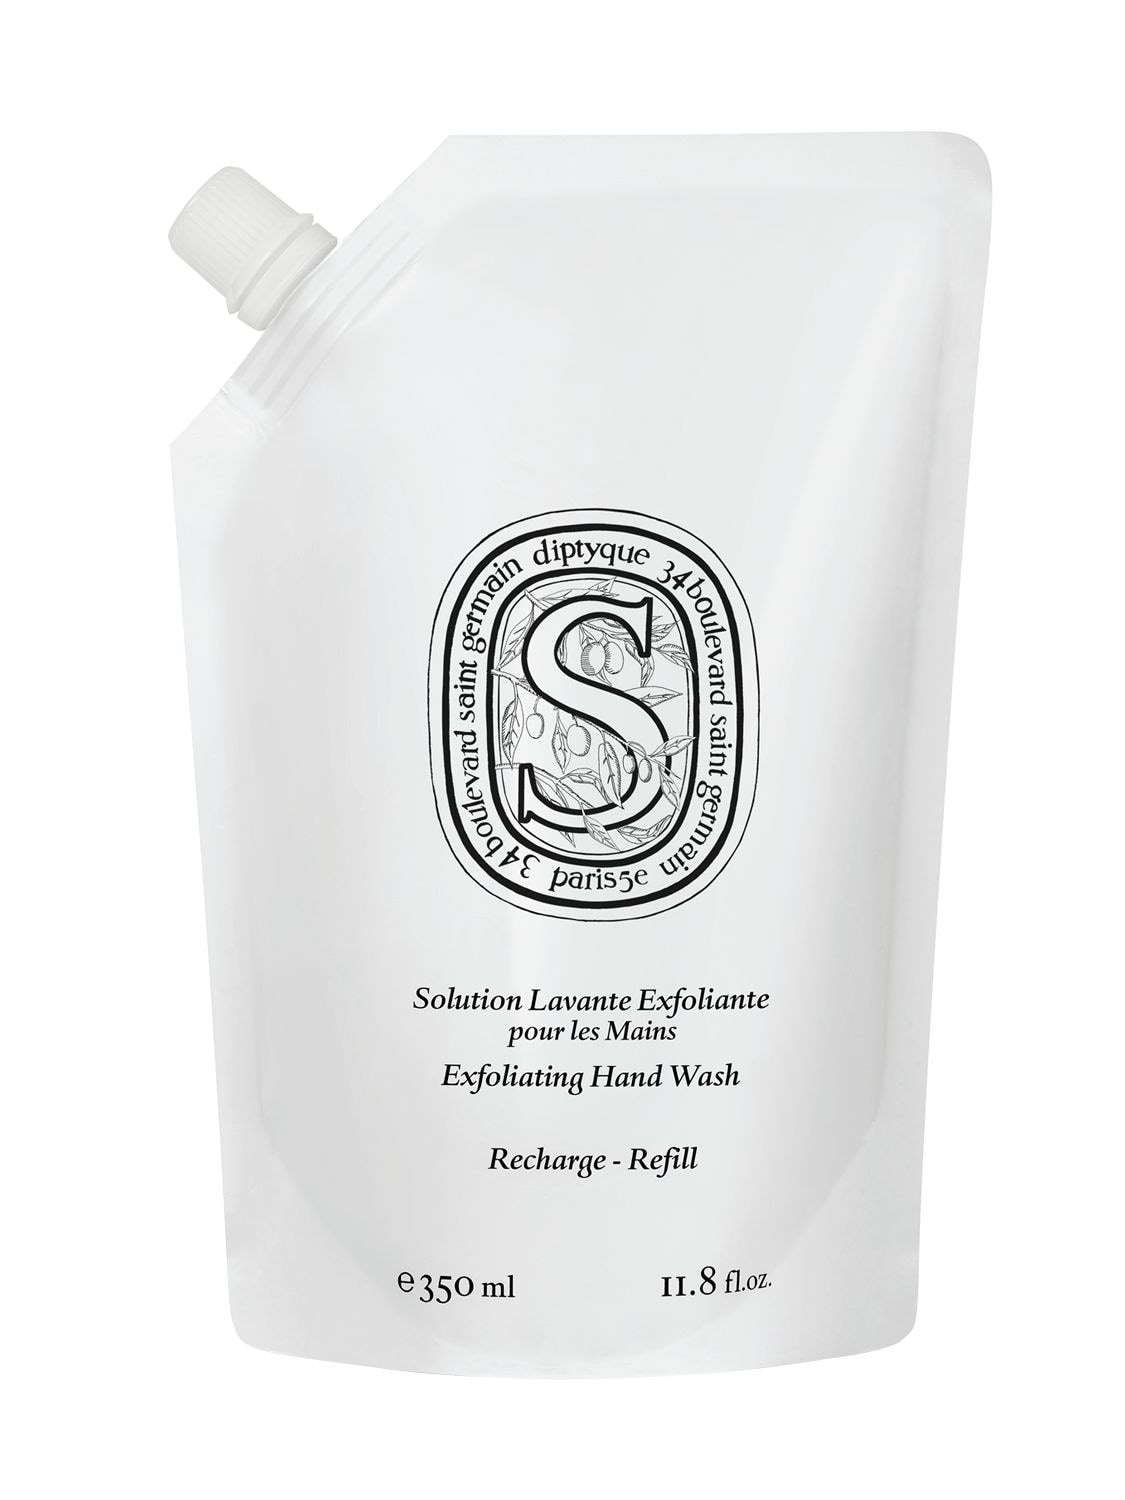 Image of 350ml Cleaning & Exfoliating Refill